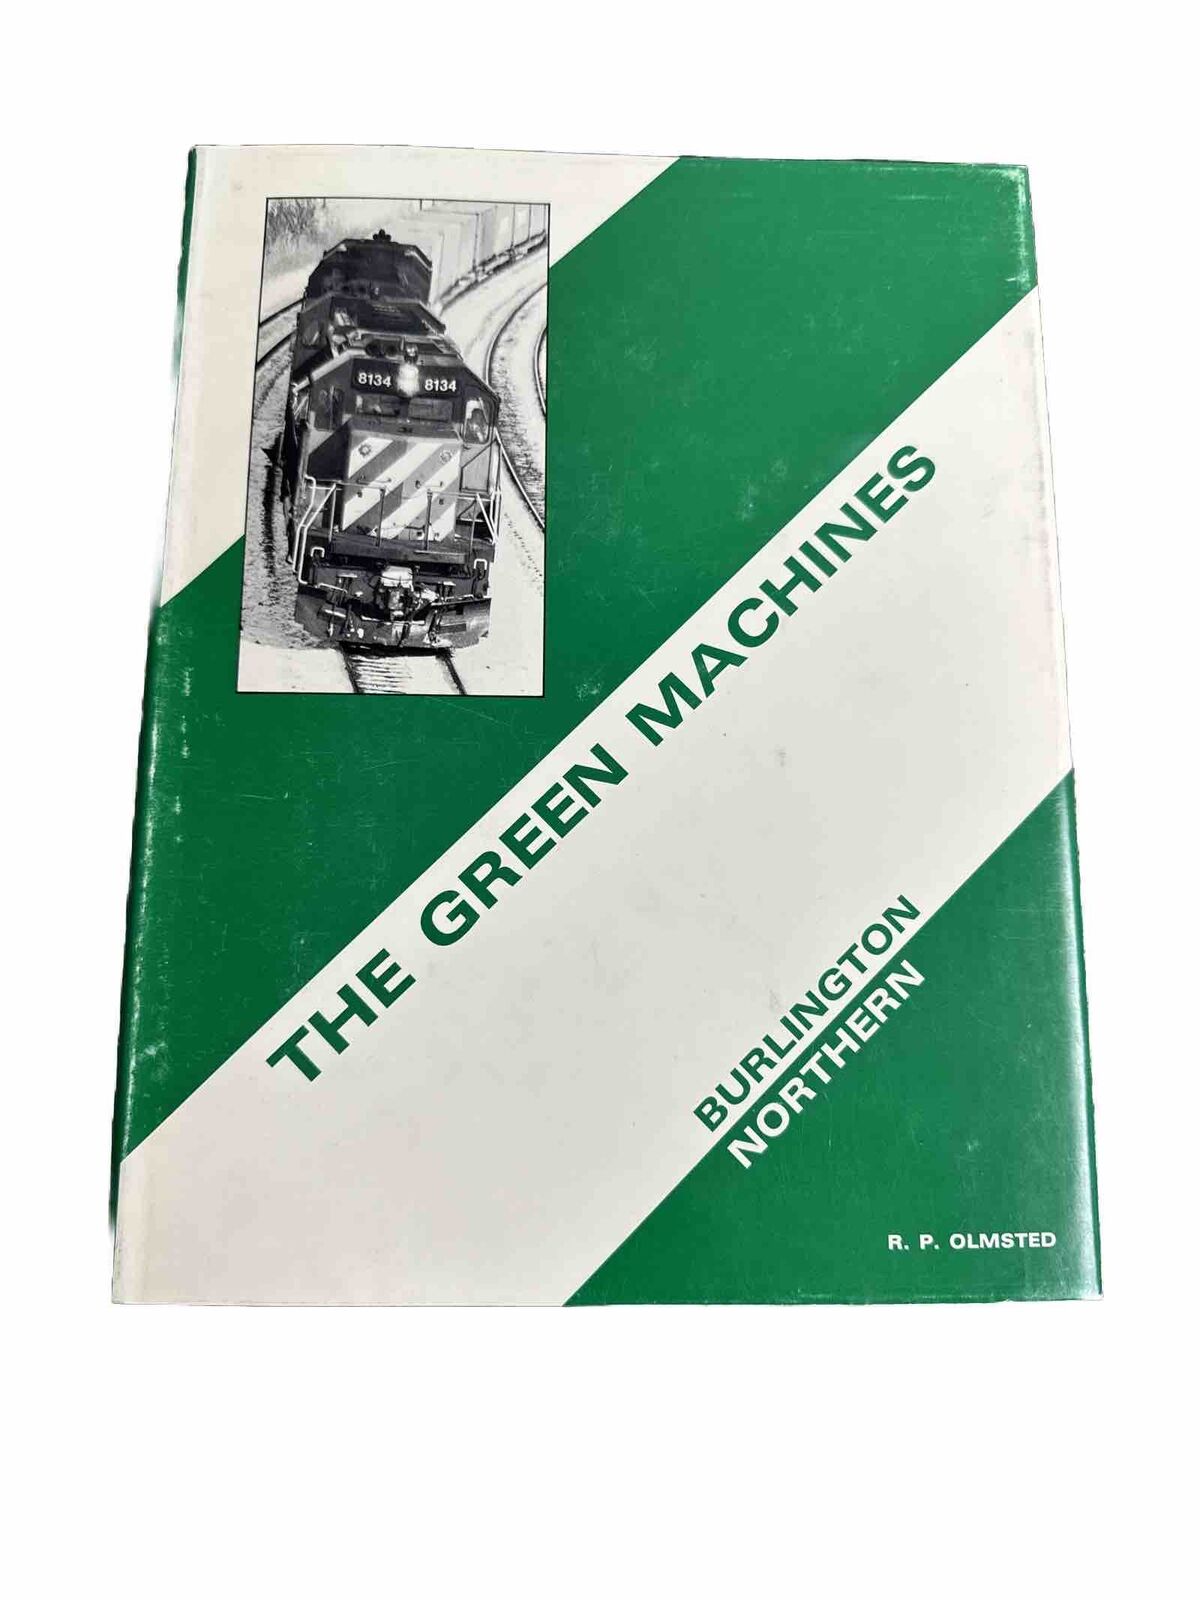 The Green Machines Burlington Northern by R. P. Olmsted - Hard Copy in DJ MINT